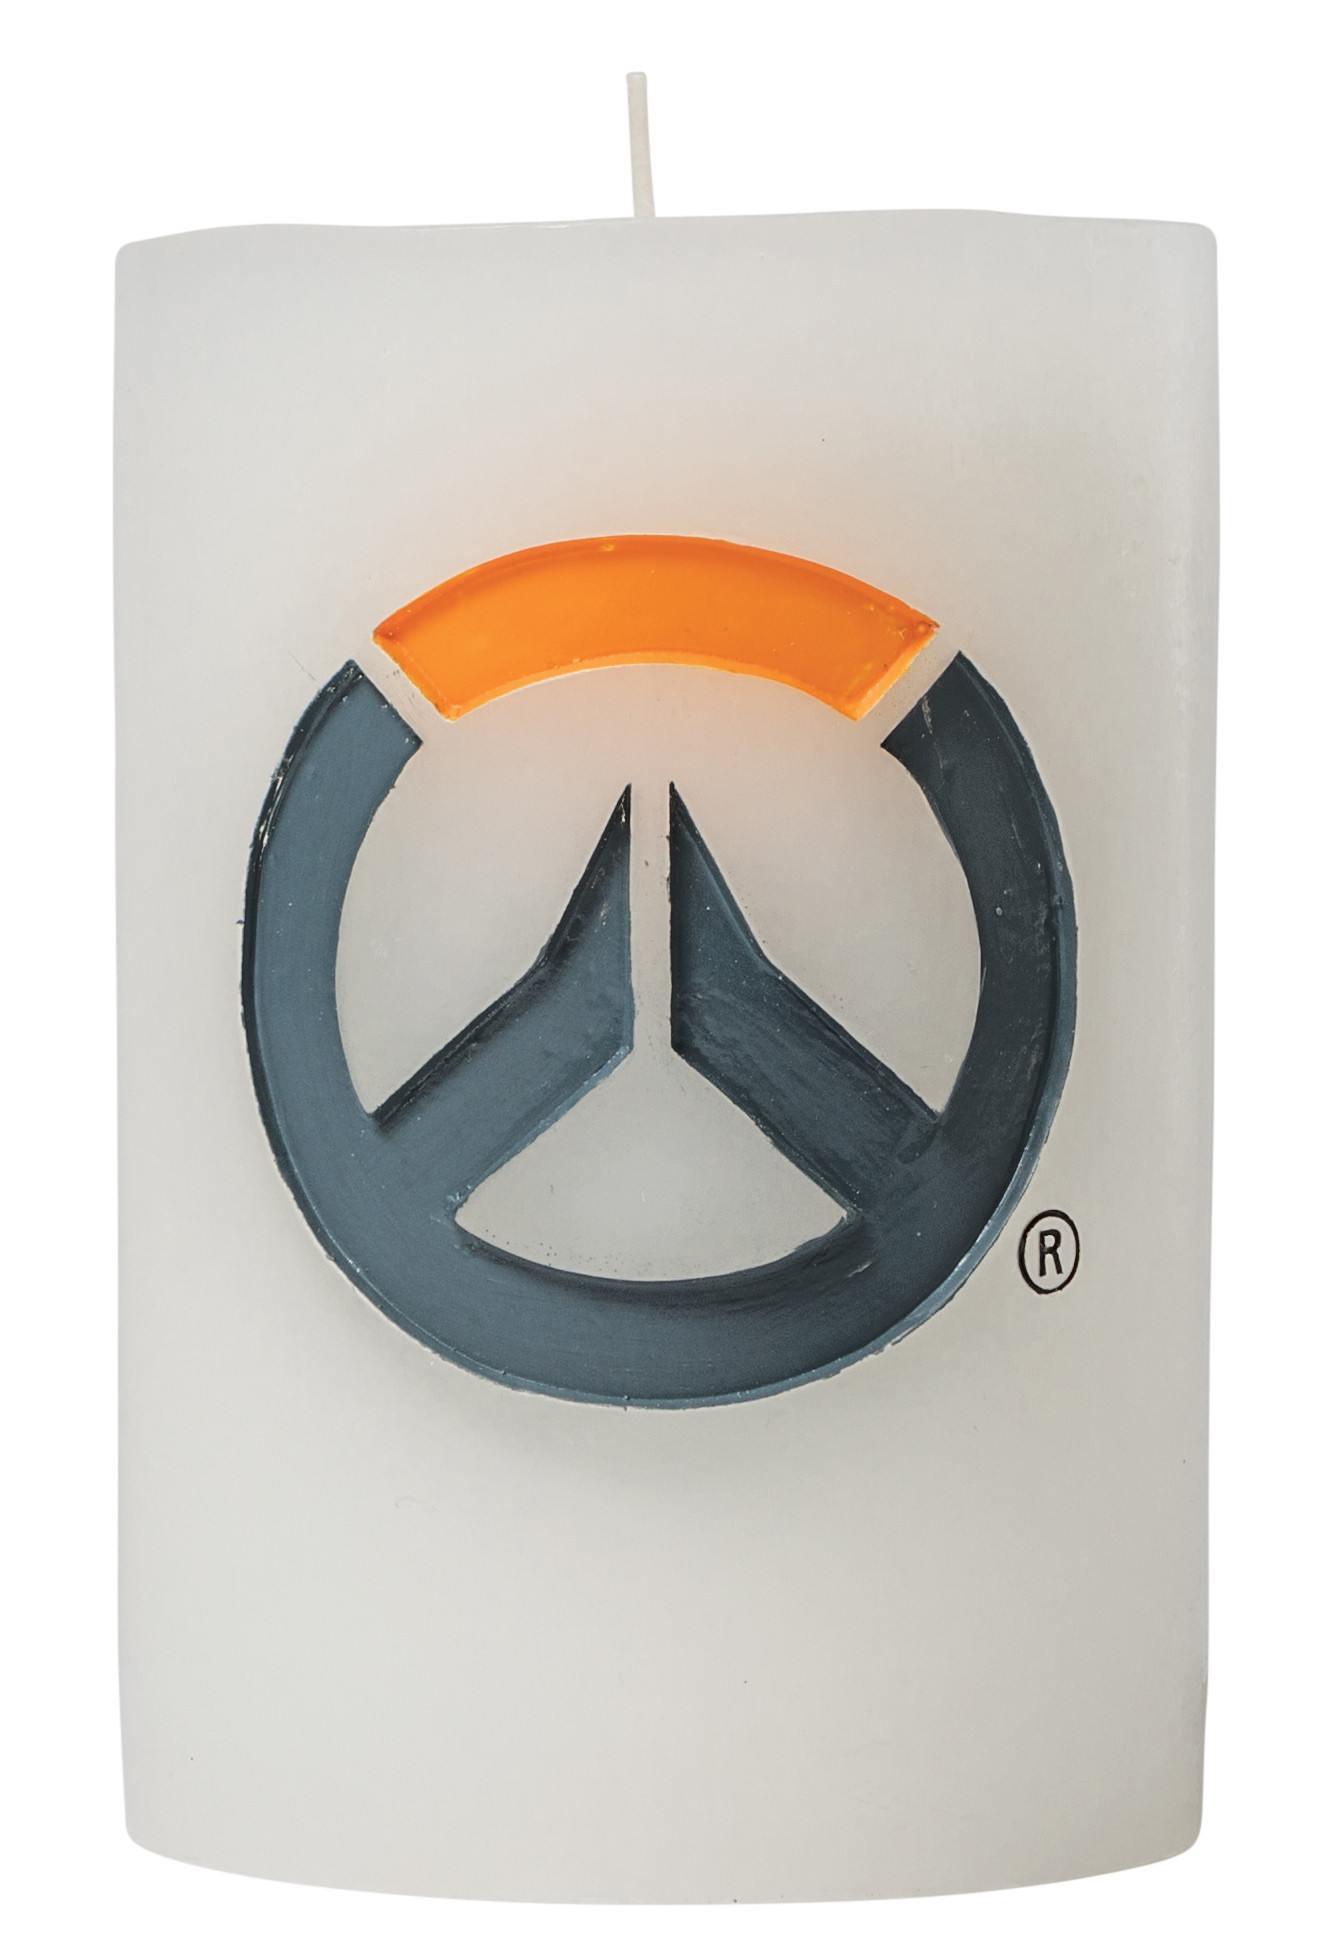 55437 Overwatch Sculpted Insignia Candle - Insight Editions - Titan Pop Culture